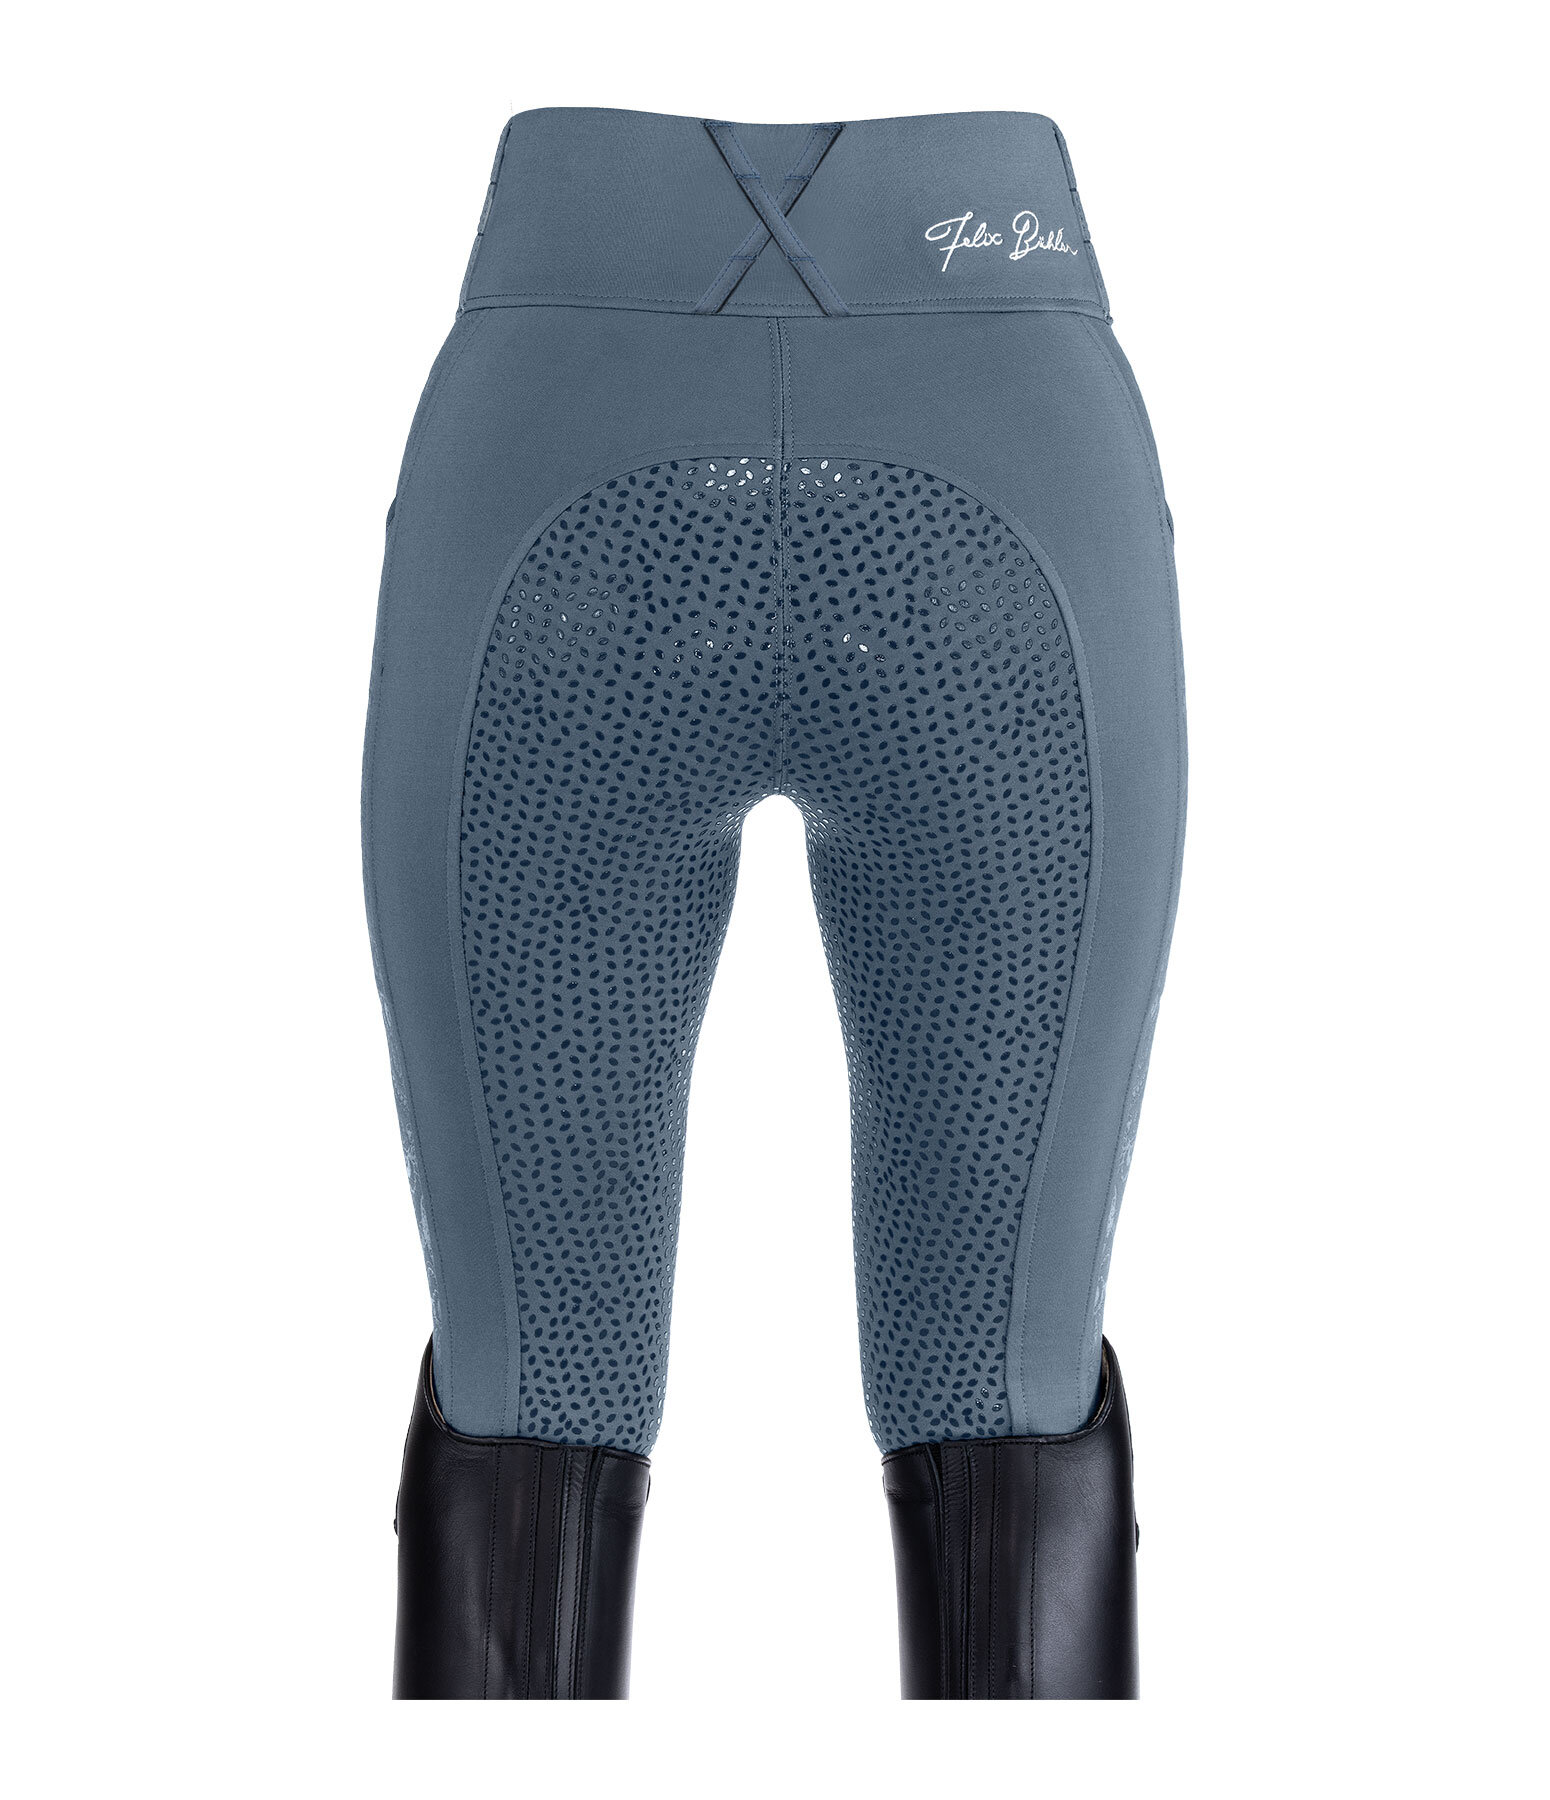 Grip Full Seat Riding Tights Lucie